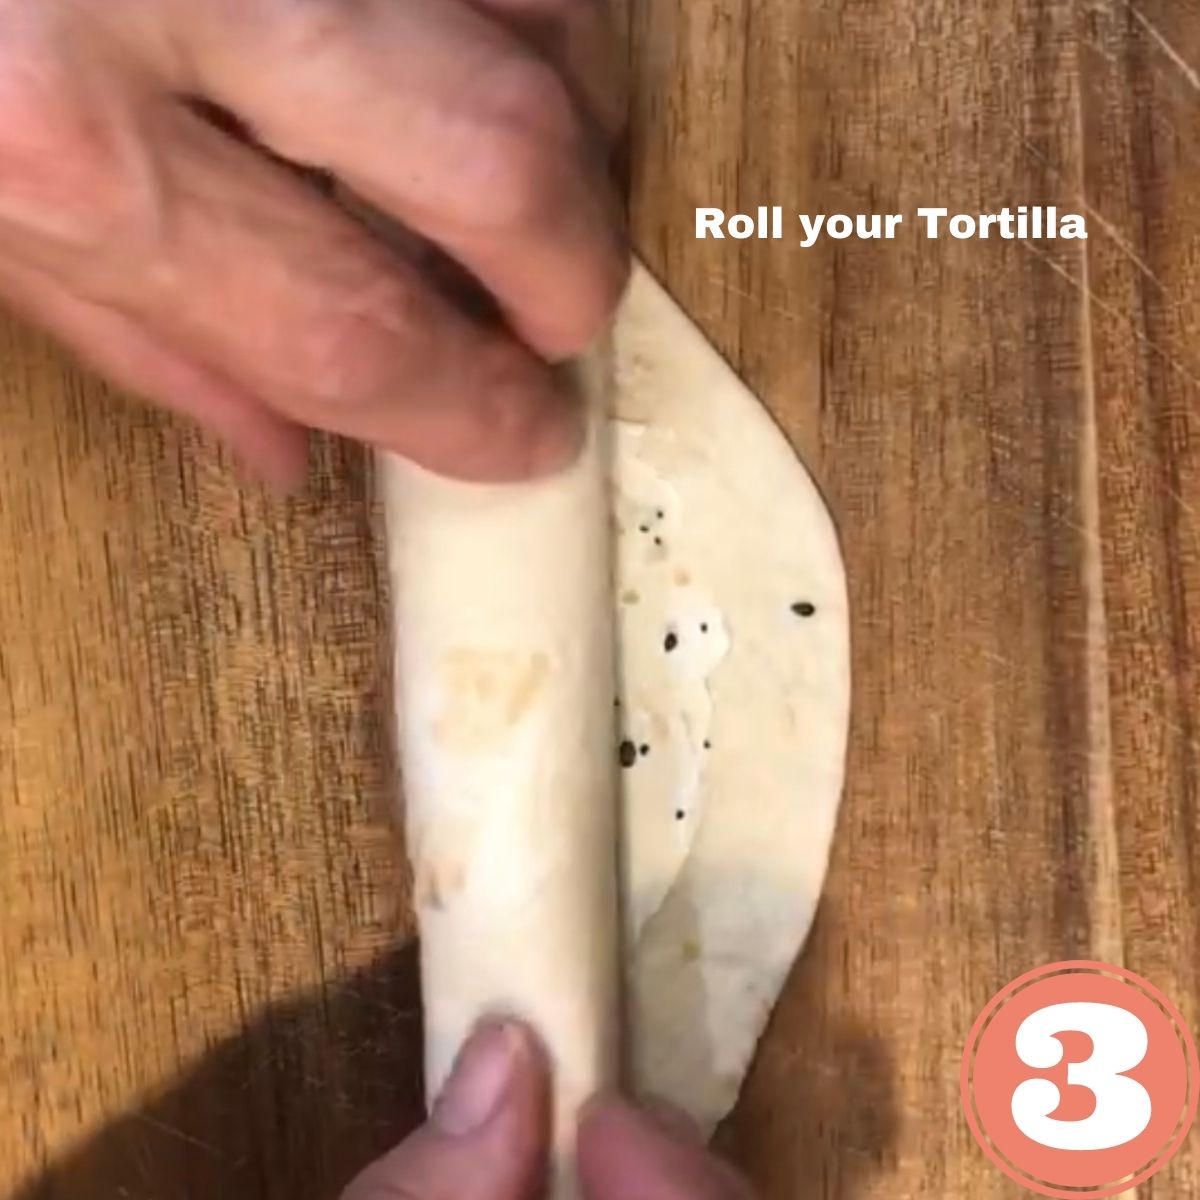 Hands rolling a tortilla on a wooden cutting board